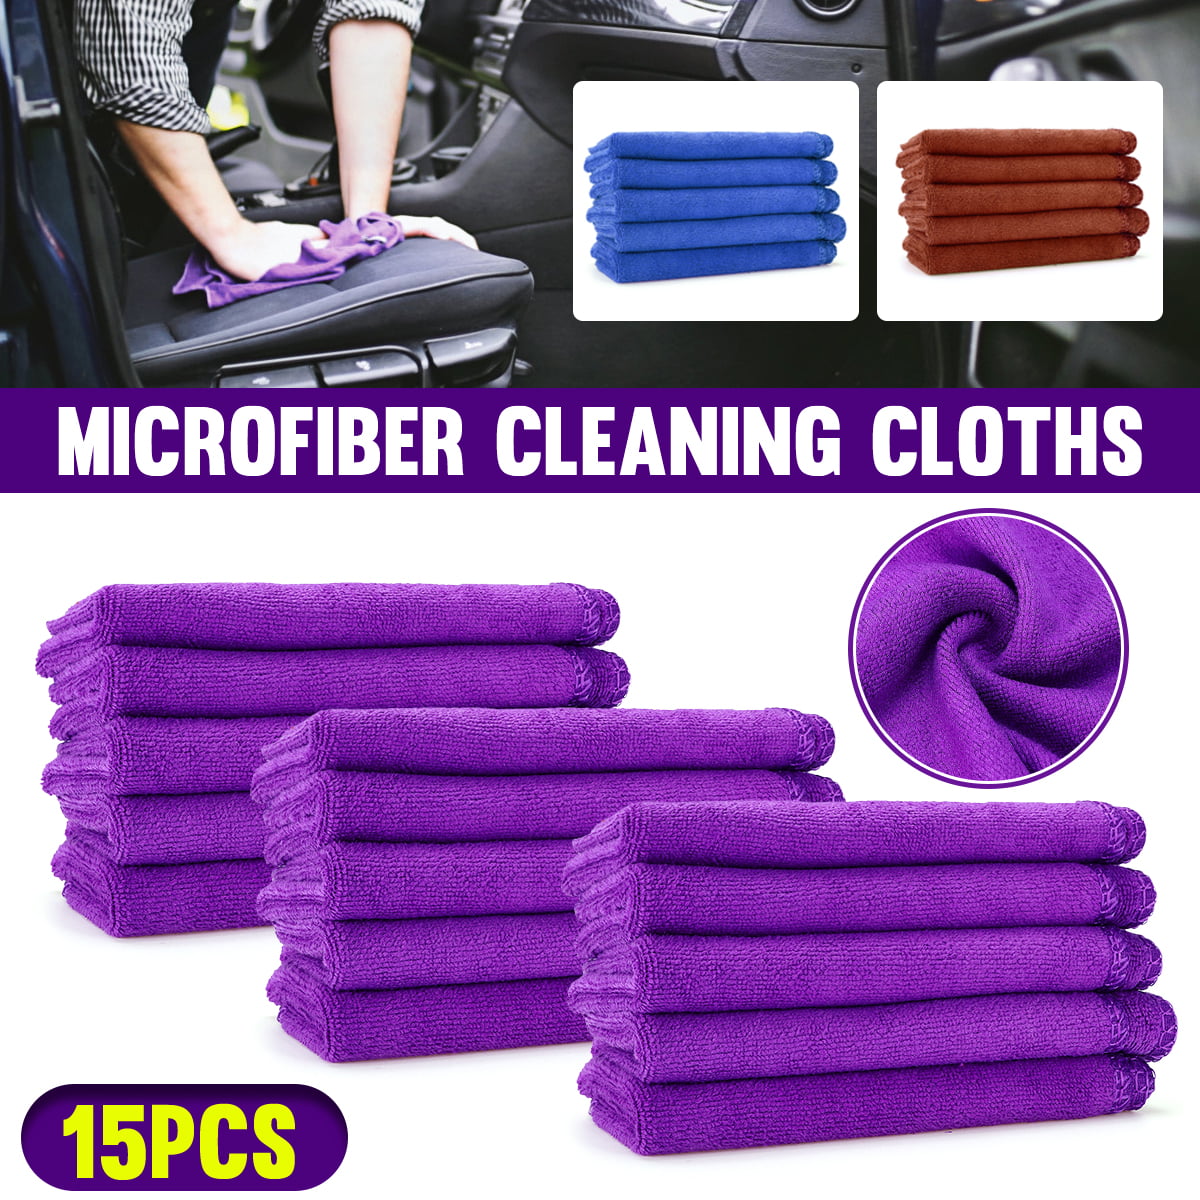 Details about   Auto Car Microfiber Cleaning Cloth Towel Rag Polishing No Scratch Detailing 